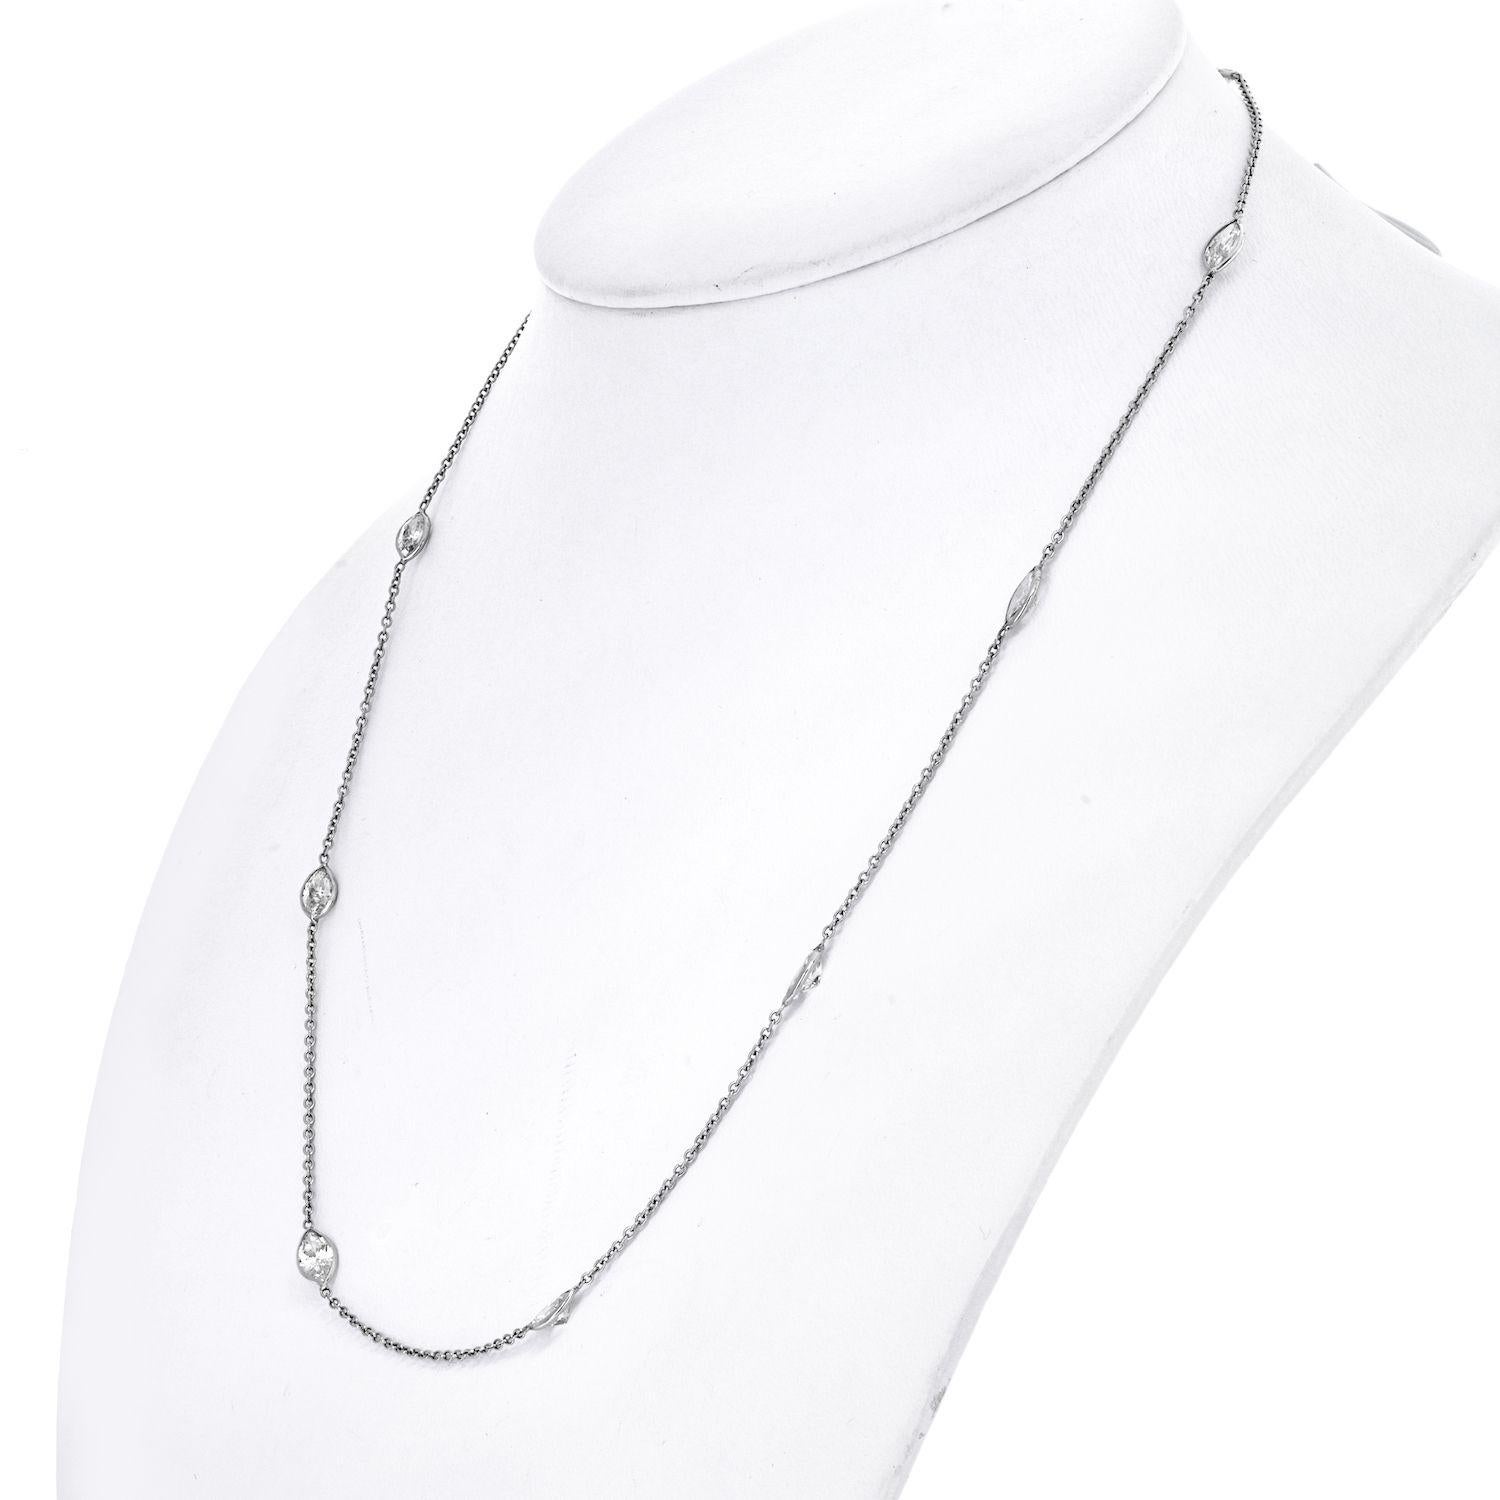 Modern 14K White Gold 5 Carat Marquise Diamond by The Yard Necklace